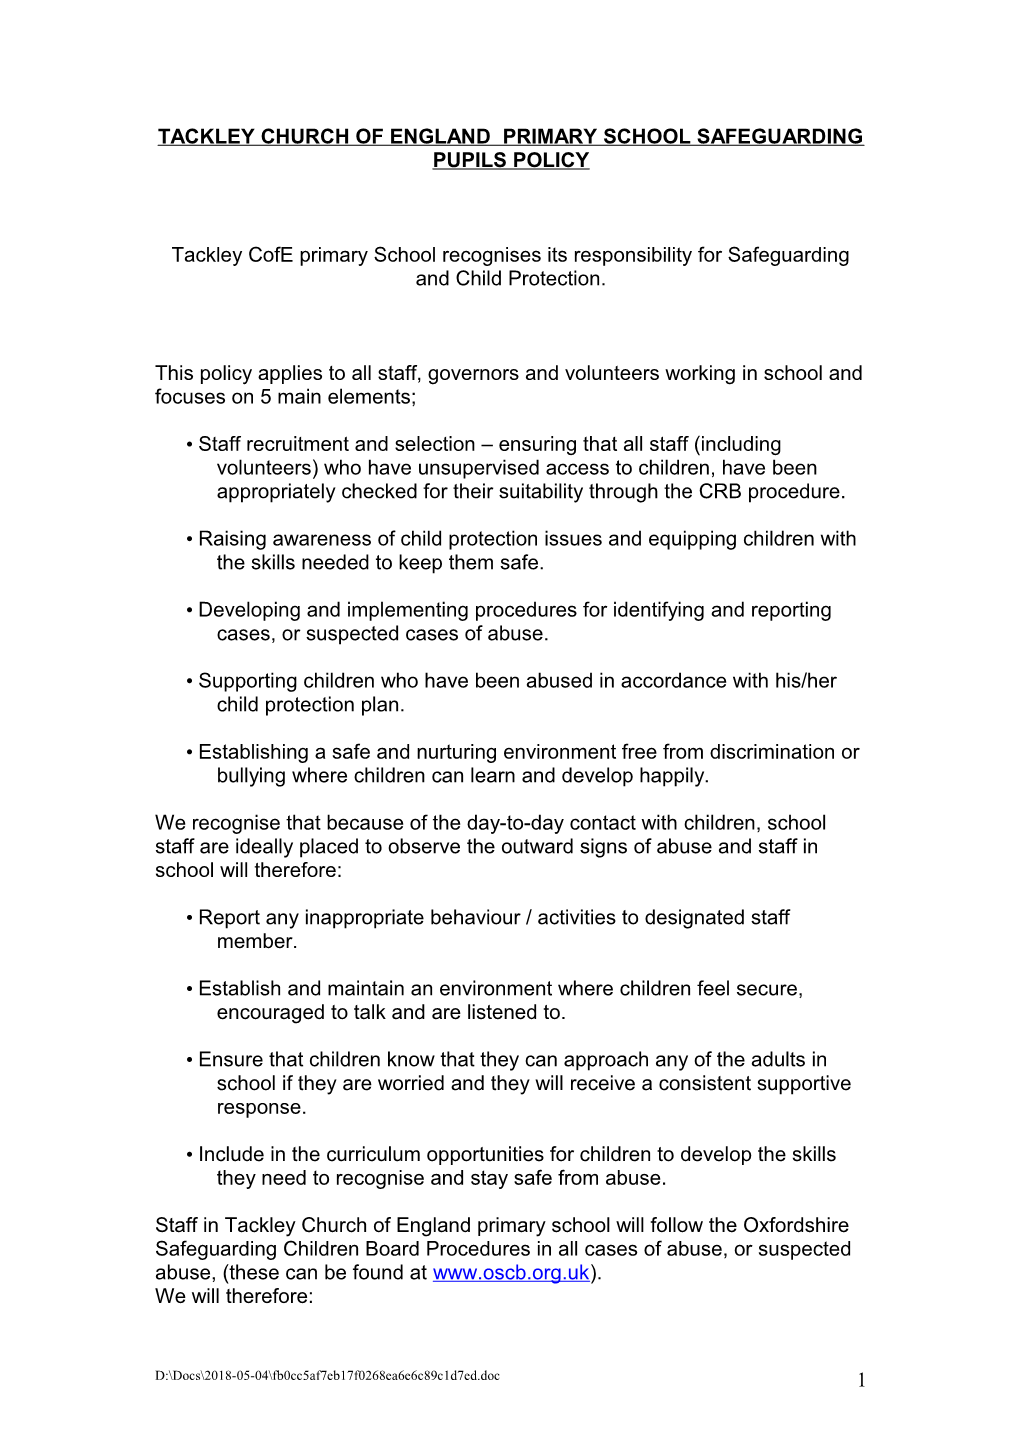 Template Safeguarding Pupils Policy s1